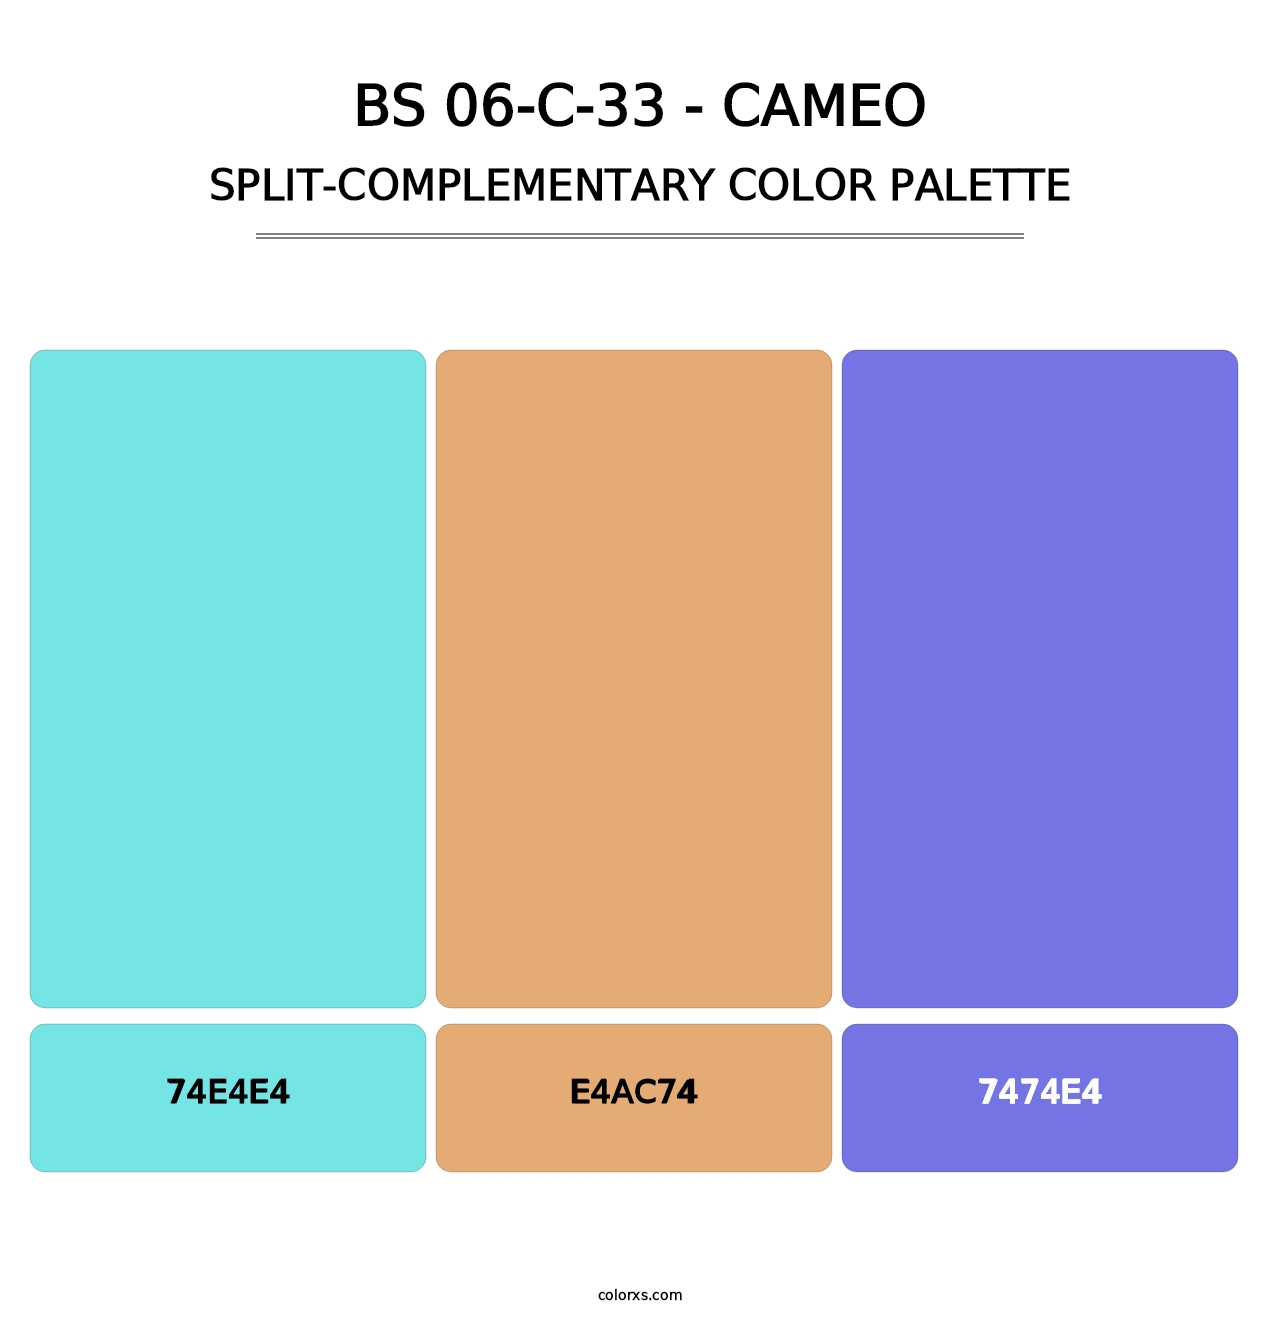 BS 06-C-33 - Cameo - Split-Complementary Color Palette